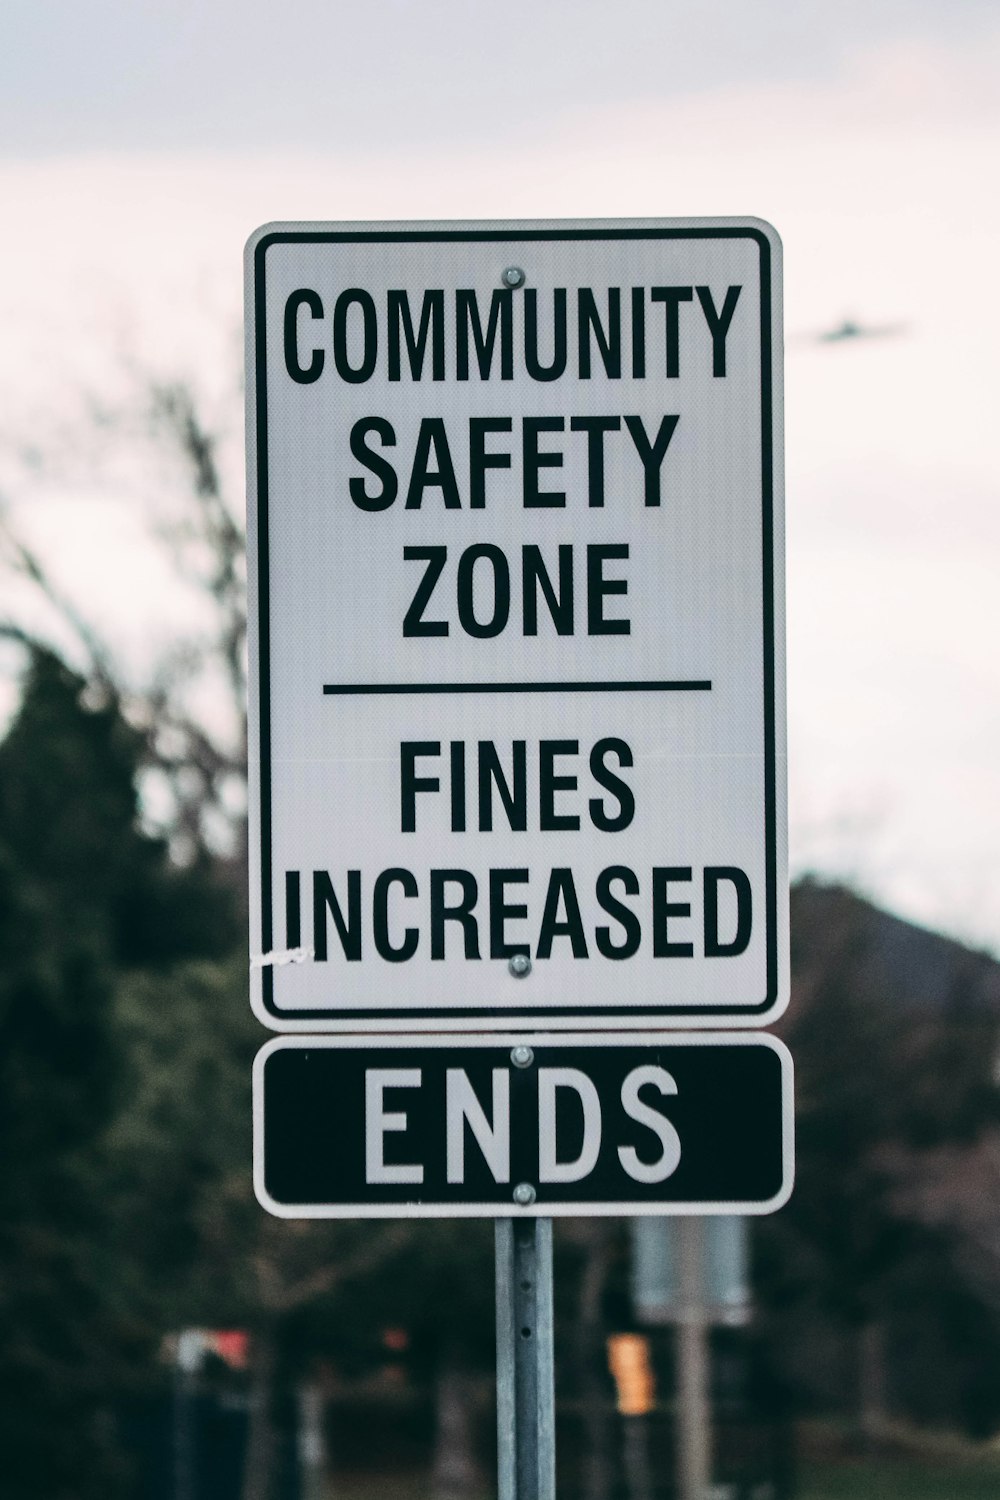 a street sign that says community safety zone fines increase ends